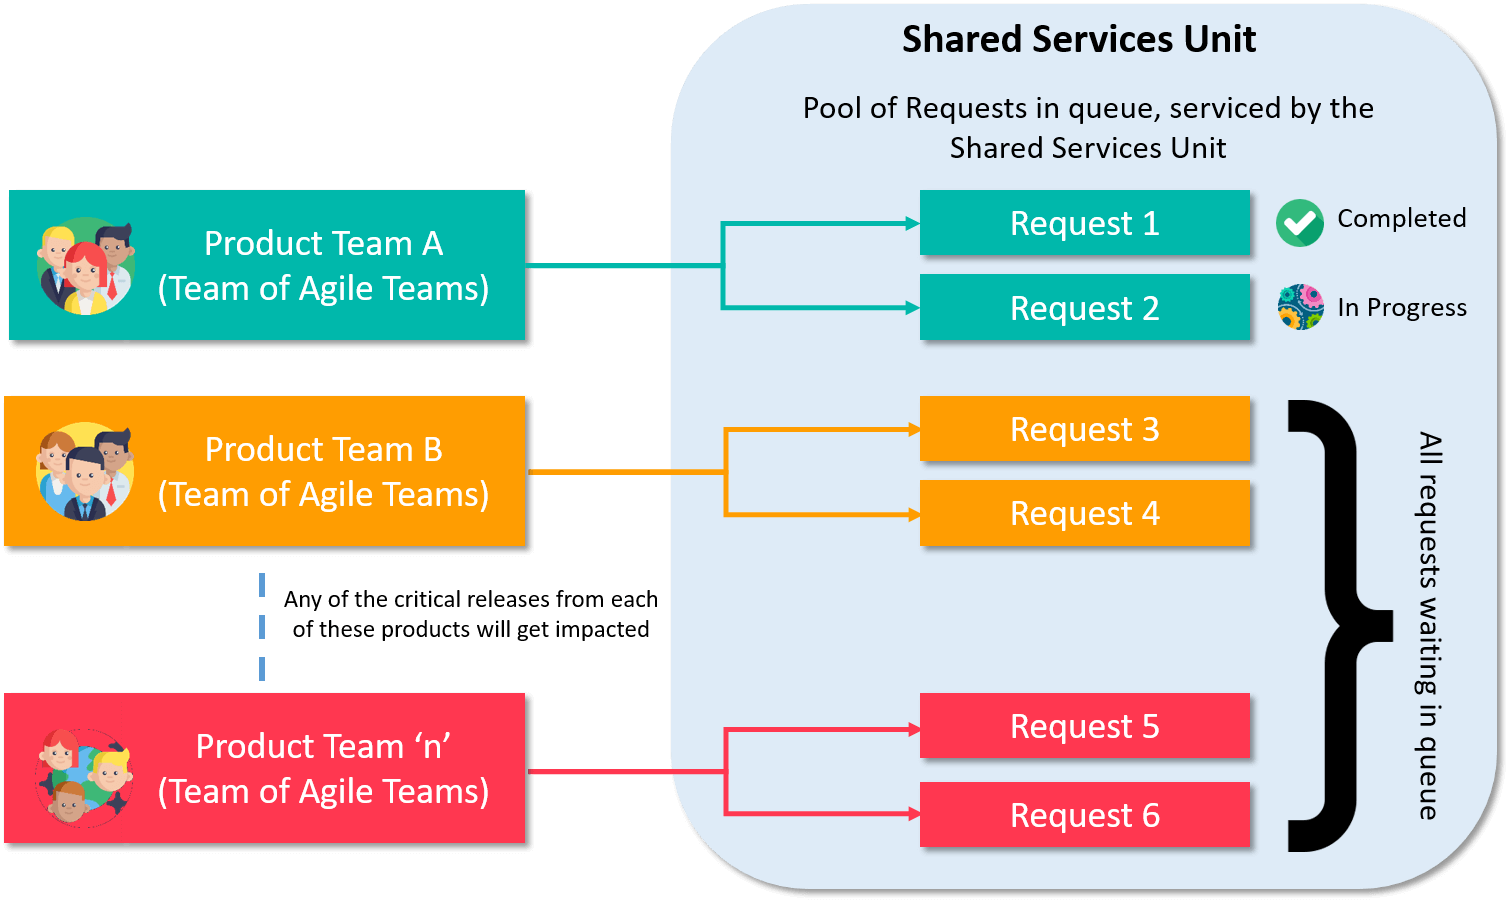 Shared Services in the Agile way